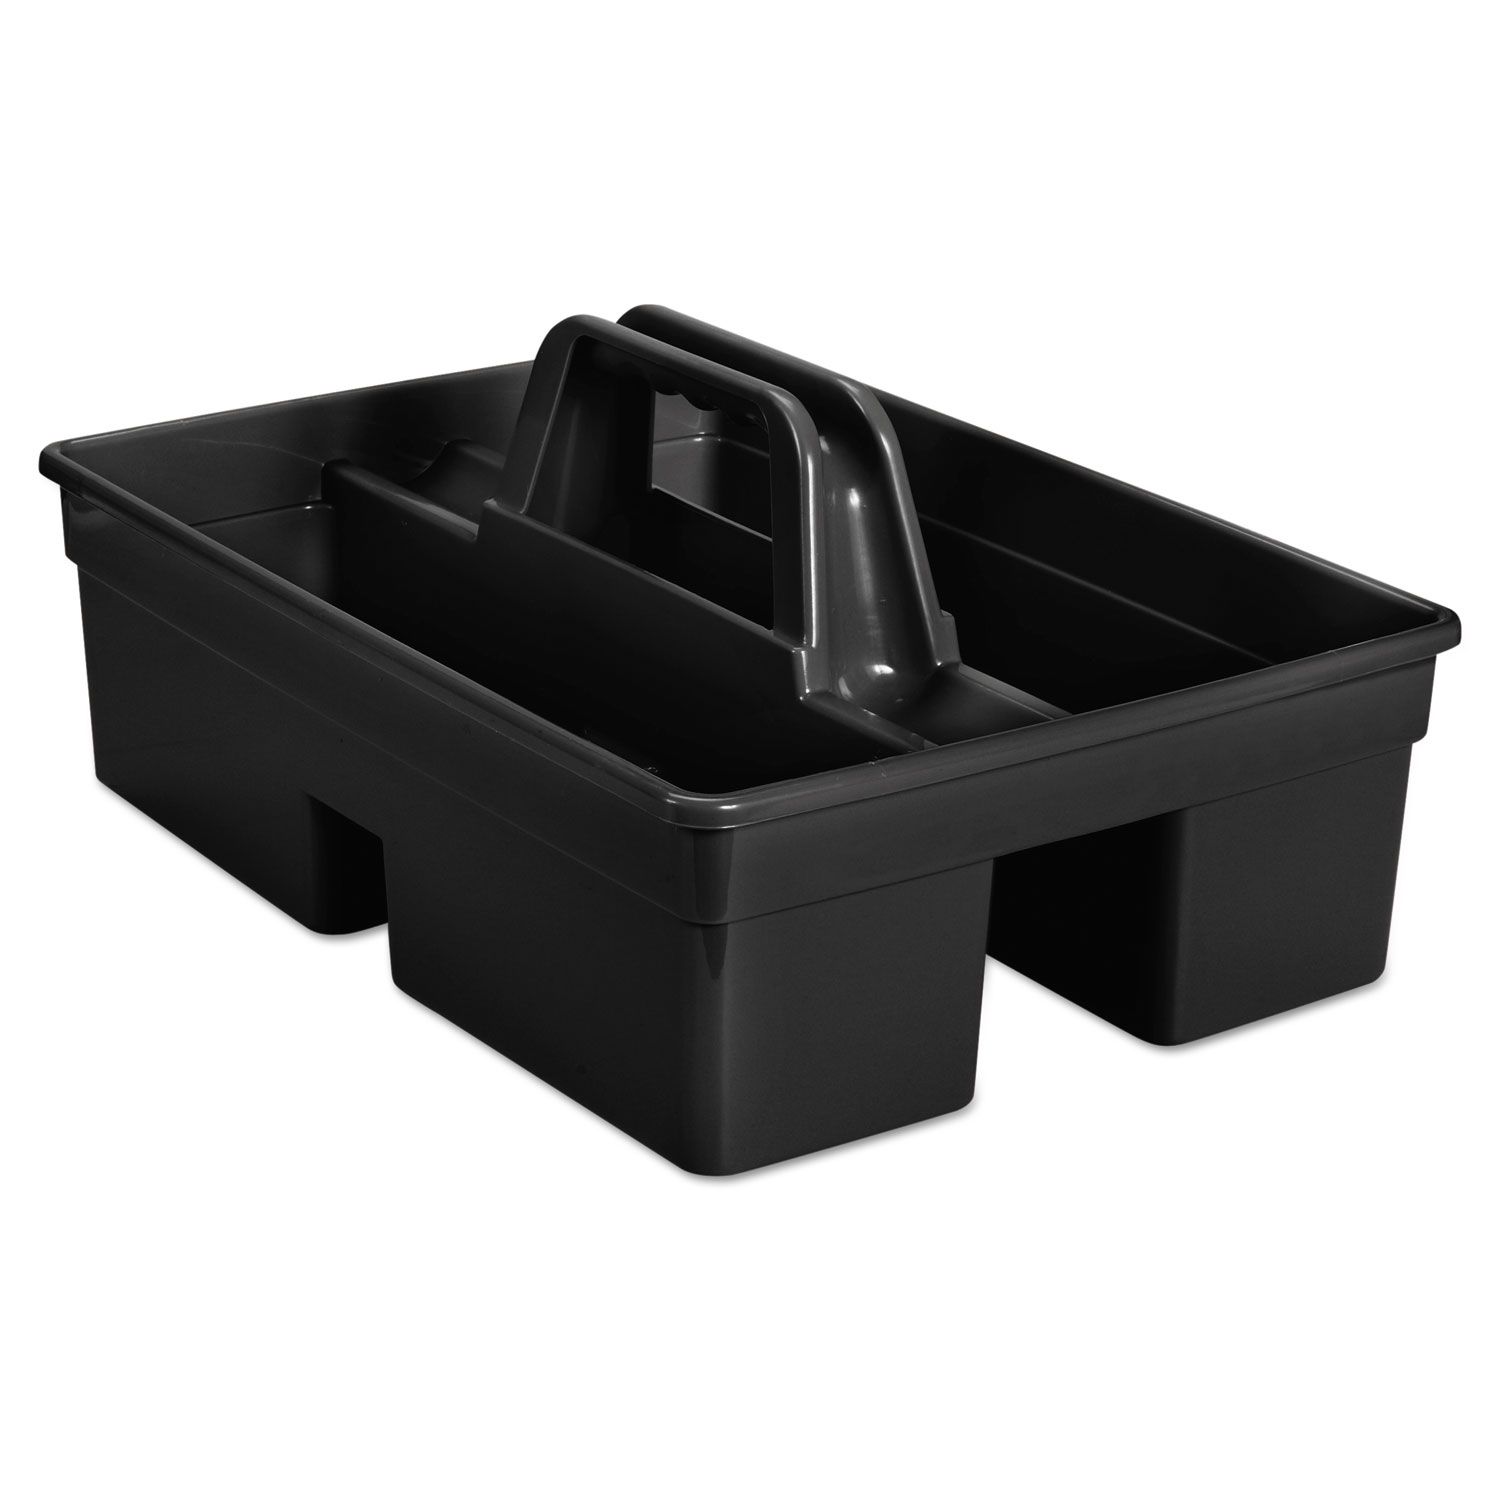 Rubbermaid Executive Carry Caddy, 2-compartment, Plastic, 10 3/4W x 6 1/2H, Black